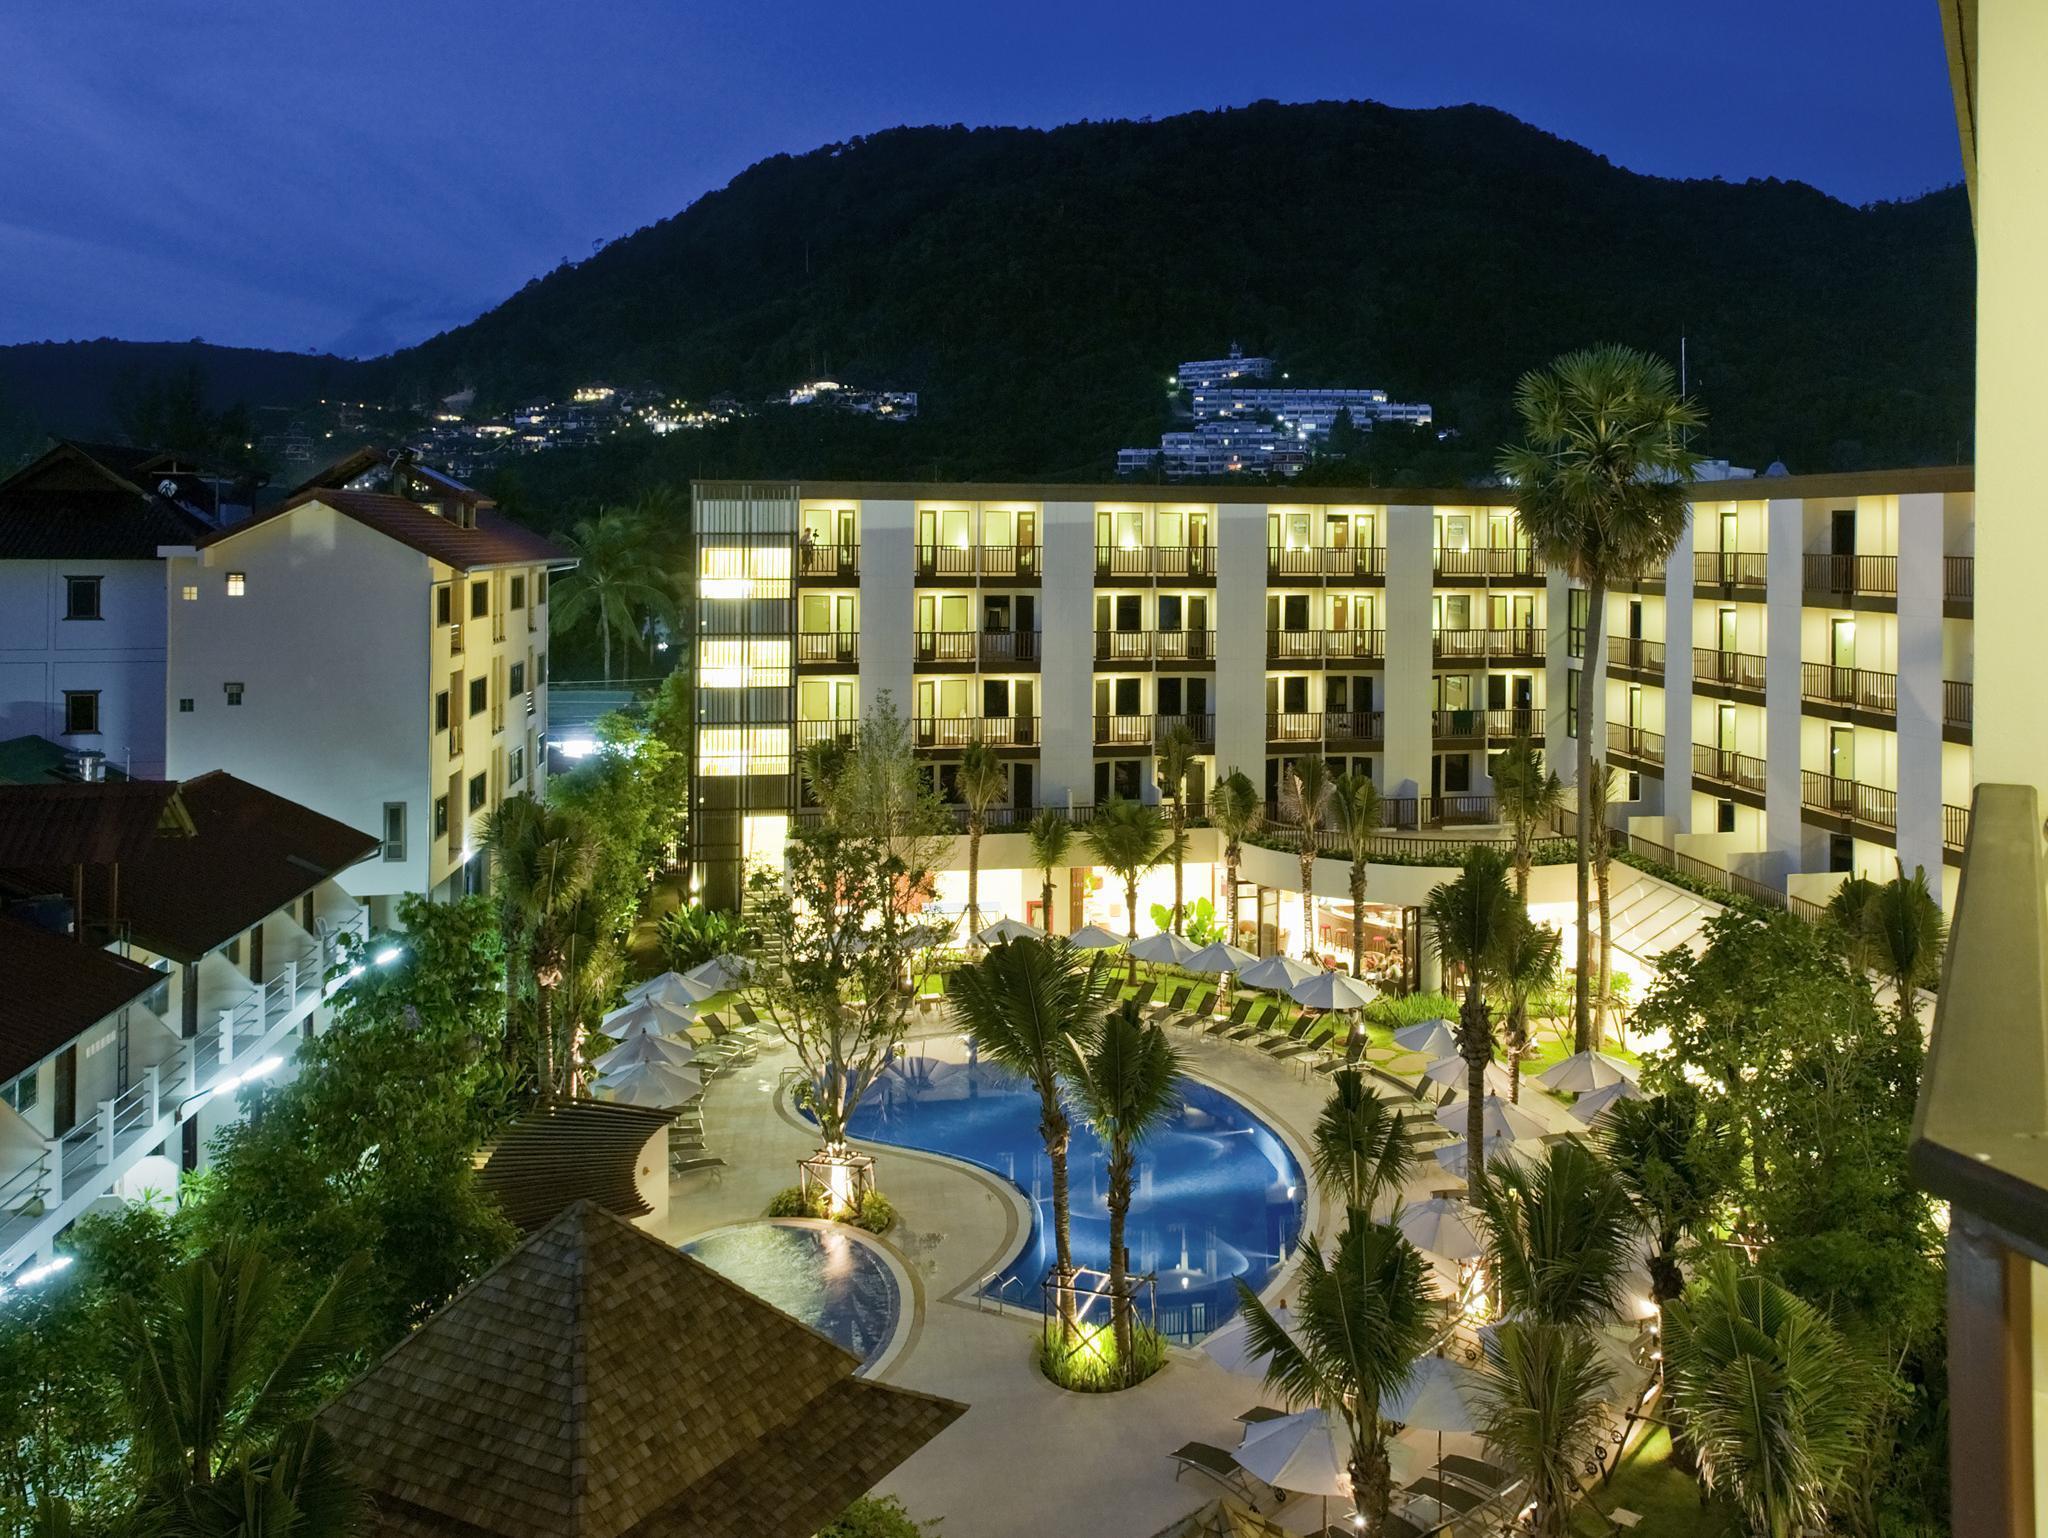 Ibis Phuket Patong Hotel Thailand FAQ 2016, What facilities are there in Ibis Phuket Patong Hotel Thailand 2016, What Languages Spoken are Supported in Ibis Phuket Patong Hotel Thailand 2016, Which payment cards are accepted in Ibis Phuket Patong Hotel Thailand , Thailand Ibis Phuket Patong Hotel room facilities and services Q&A 2016, Thailand Ibis Phuket Patong Hotel online booking services 2016, Thailand Ibis Phuket Patong Hotel address 2016, Thailand Ibis Phuket Patong Hotel telephone number 2016,Thailand Ibis Phuket Patong Hotel map 2016, Thailand Ibis Phuket Patong Hotel traffic guide 2016, how to go Thailand Ibis Phuket Patong Hotel, Thailand Ibis Phuket Patong Hotel booking online 2016, Thailand Ibis Phuket Patong Hotel room types 2016.